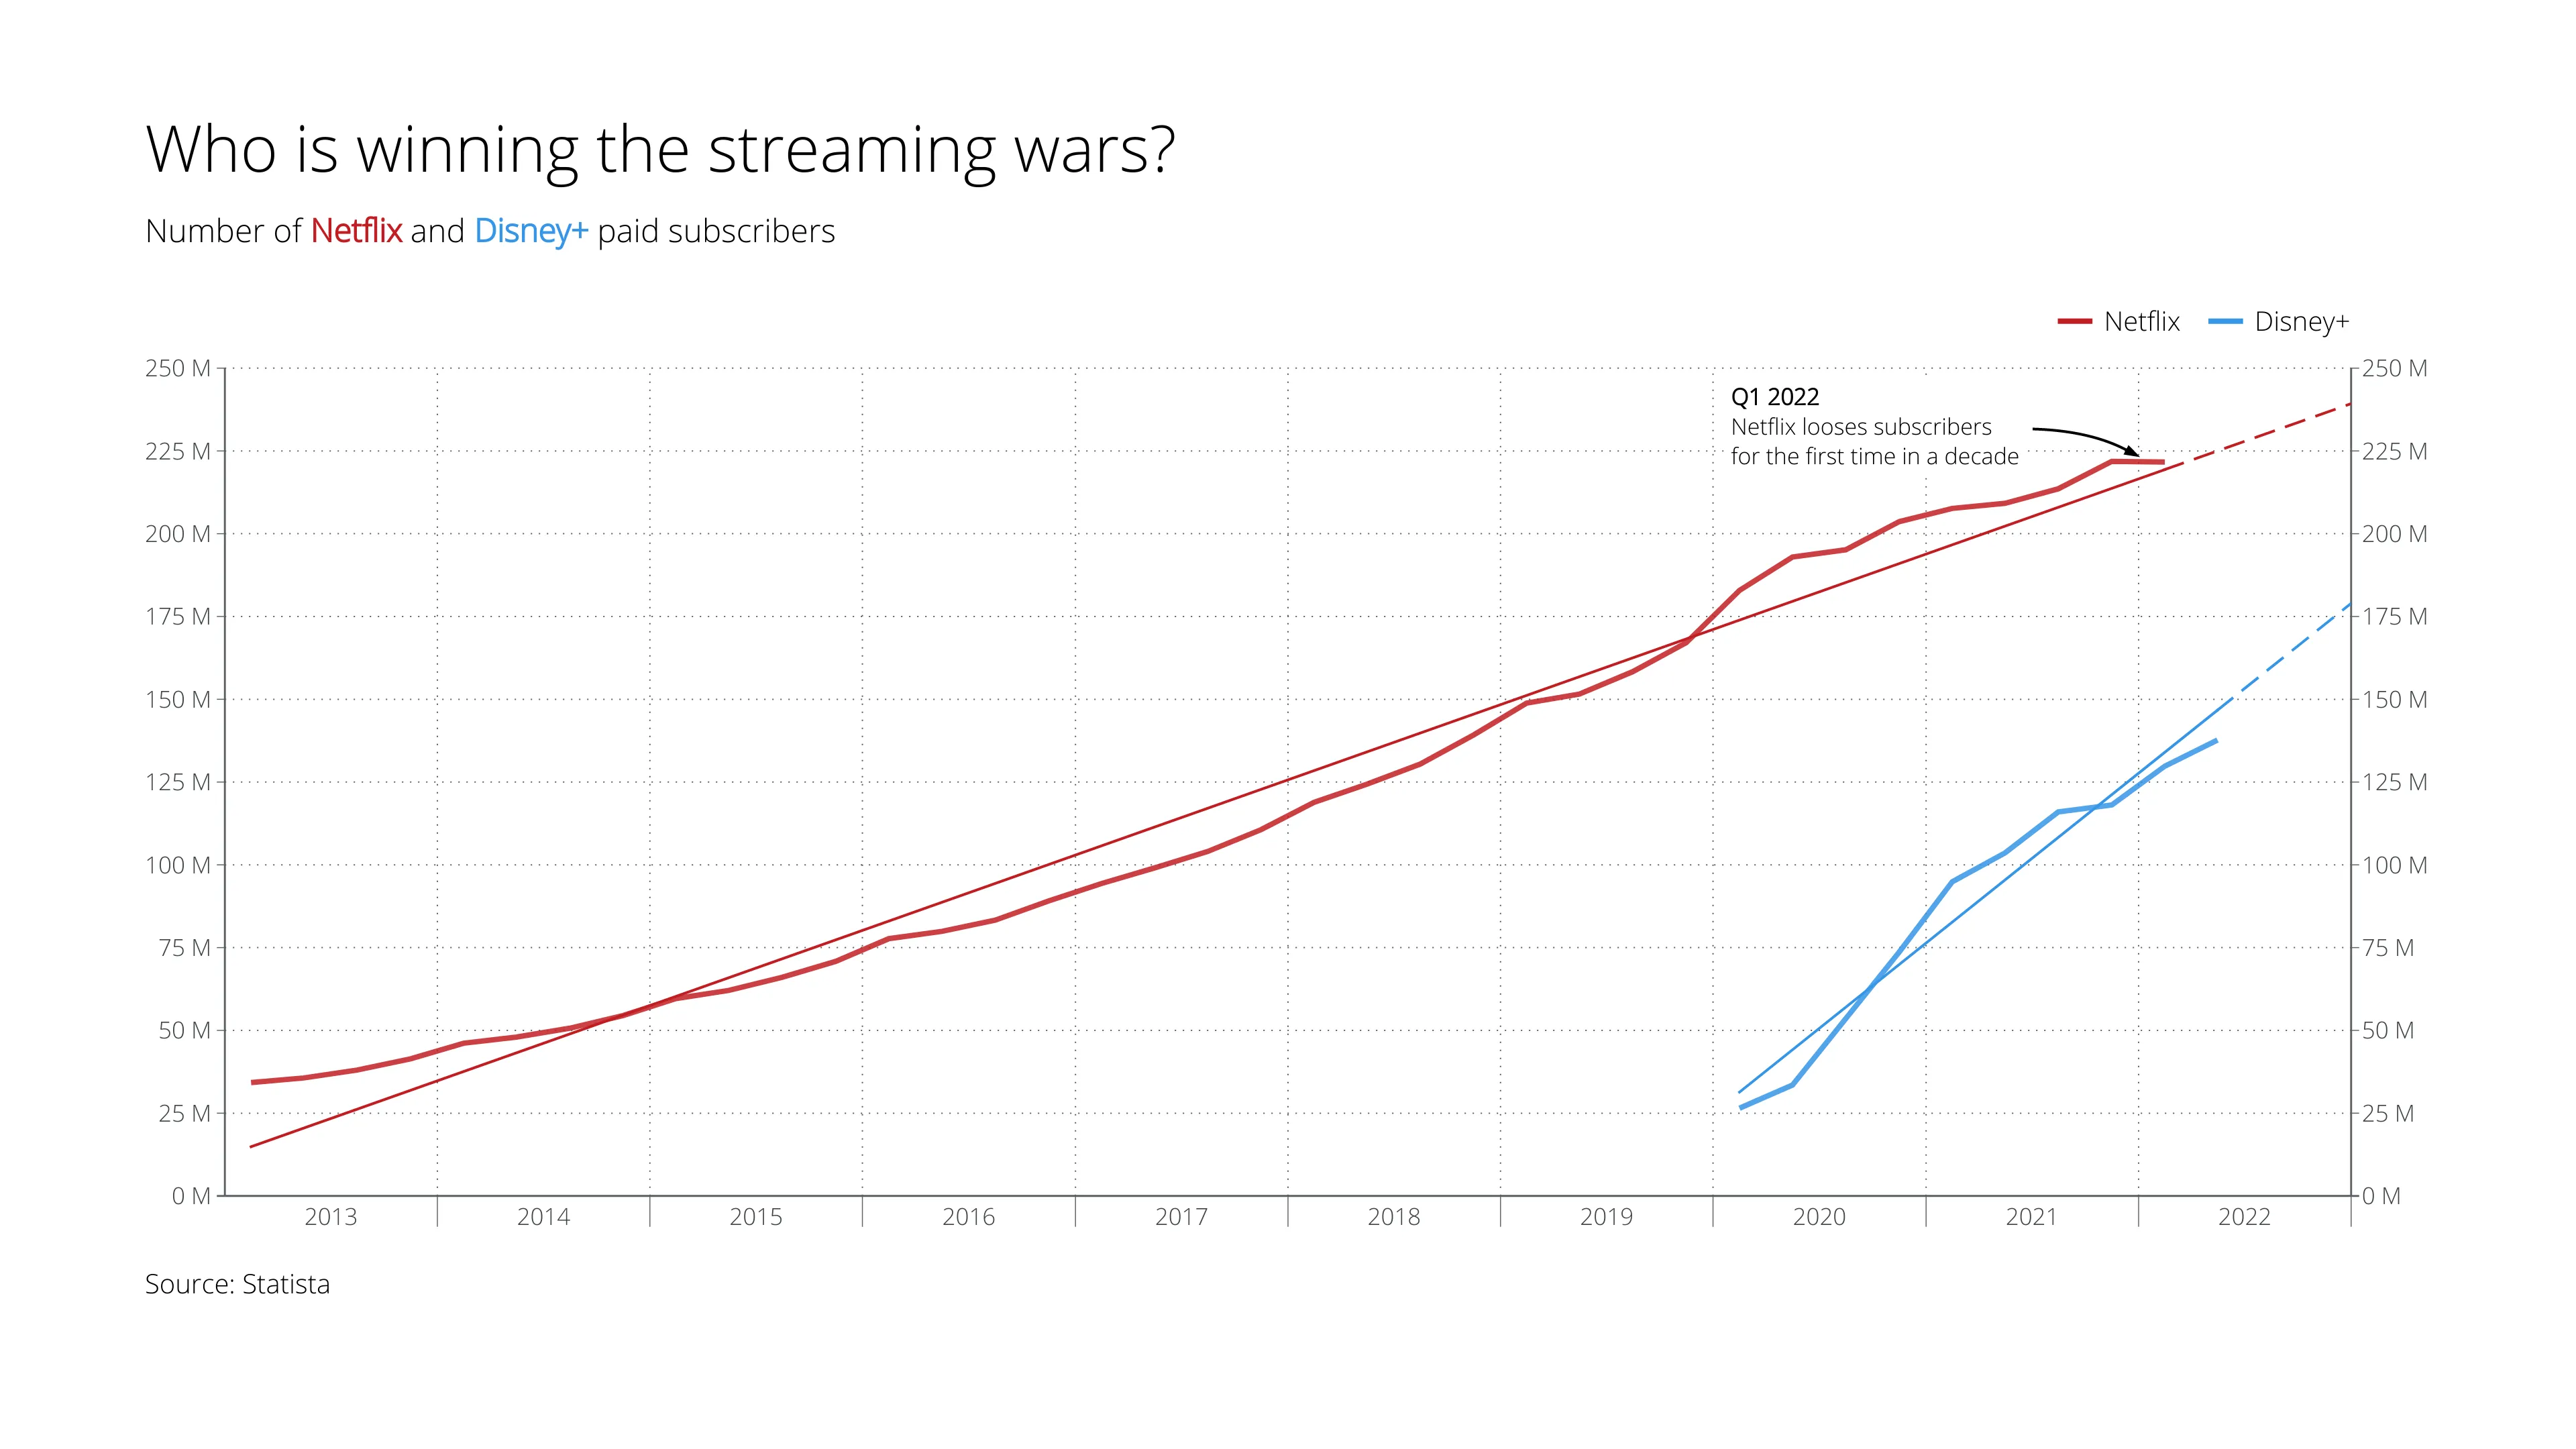 Who is winning the streaming wars?